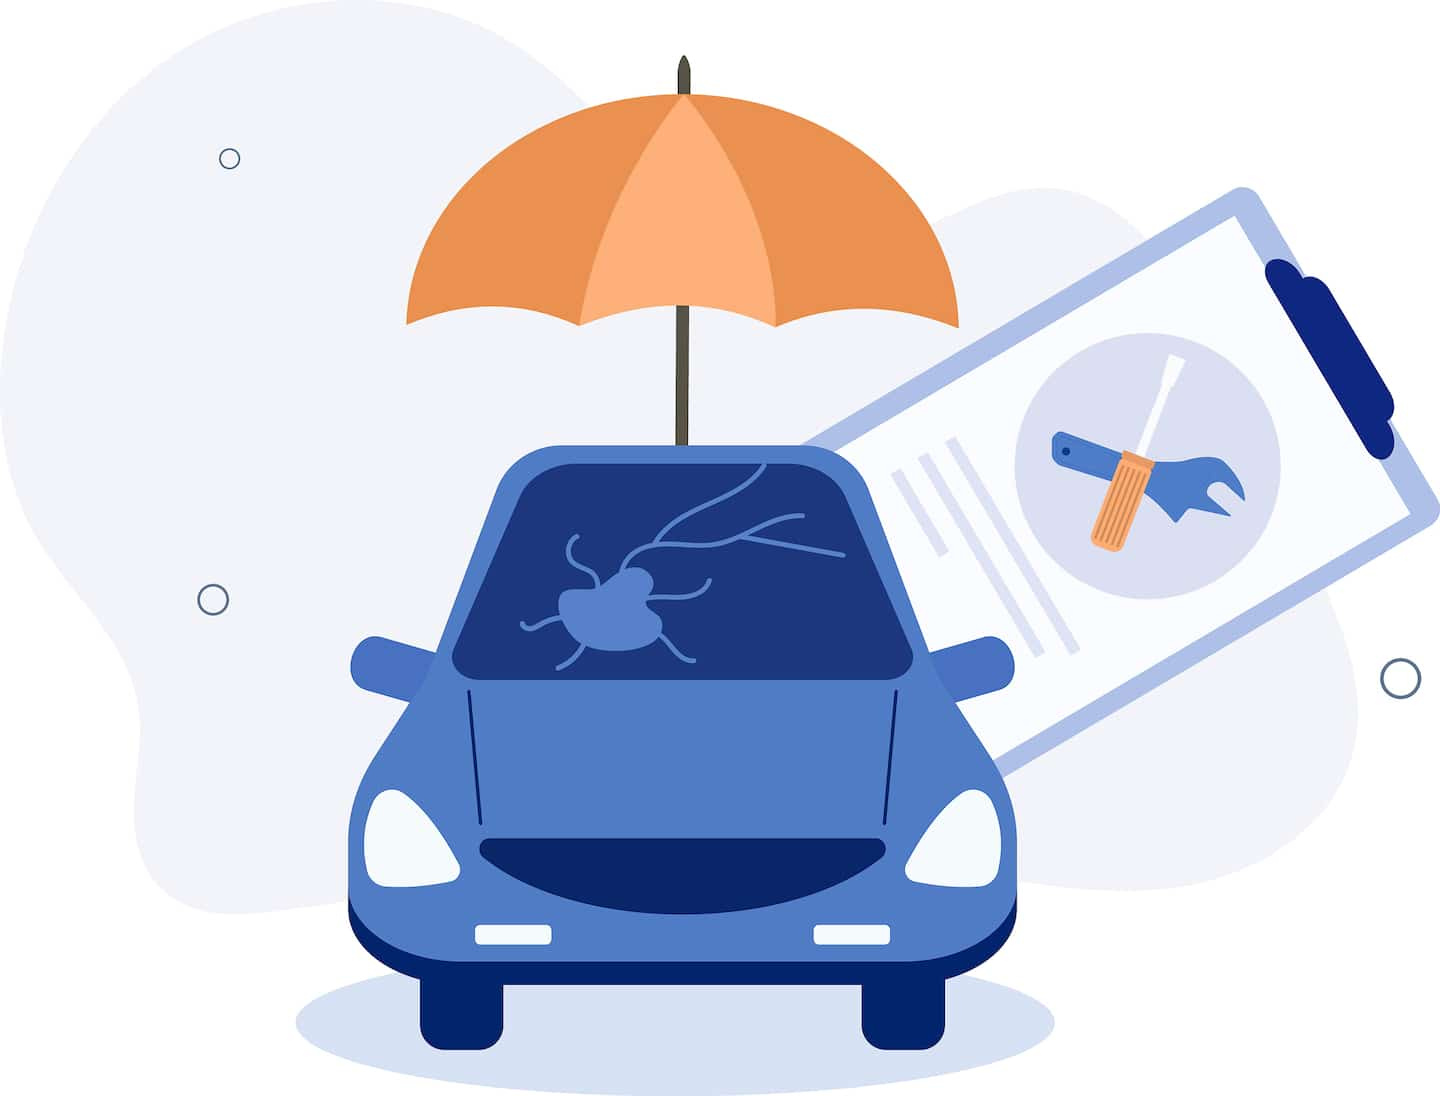 Does your insurance cover your broken windshield?